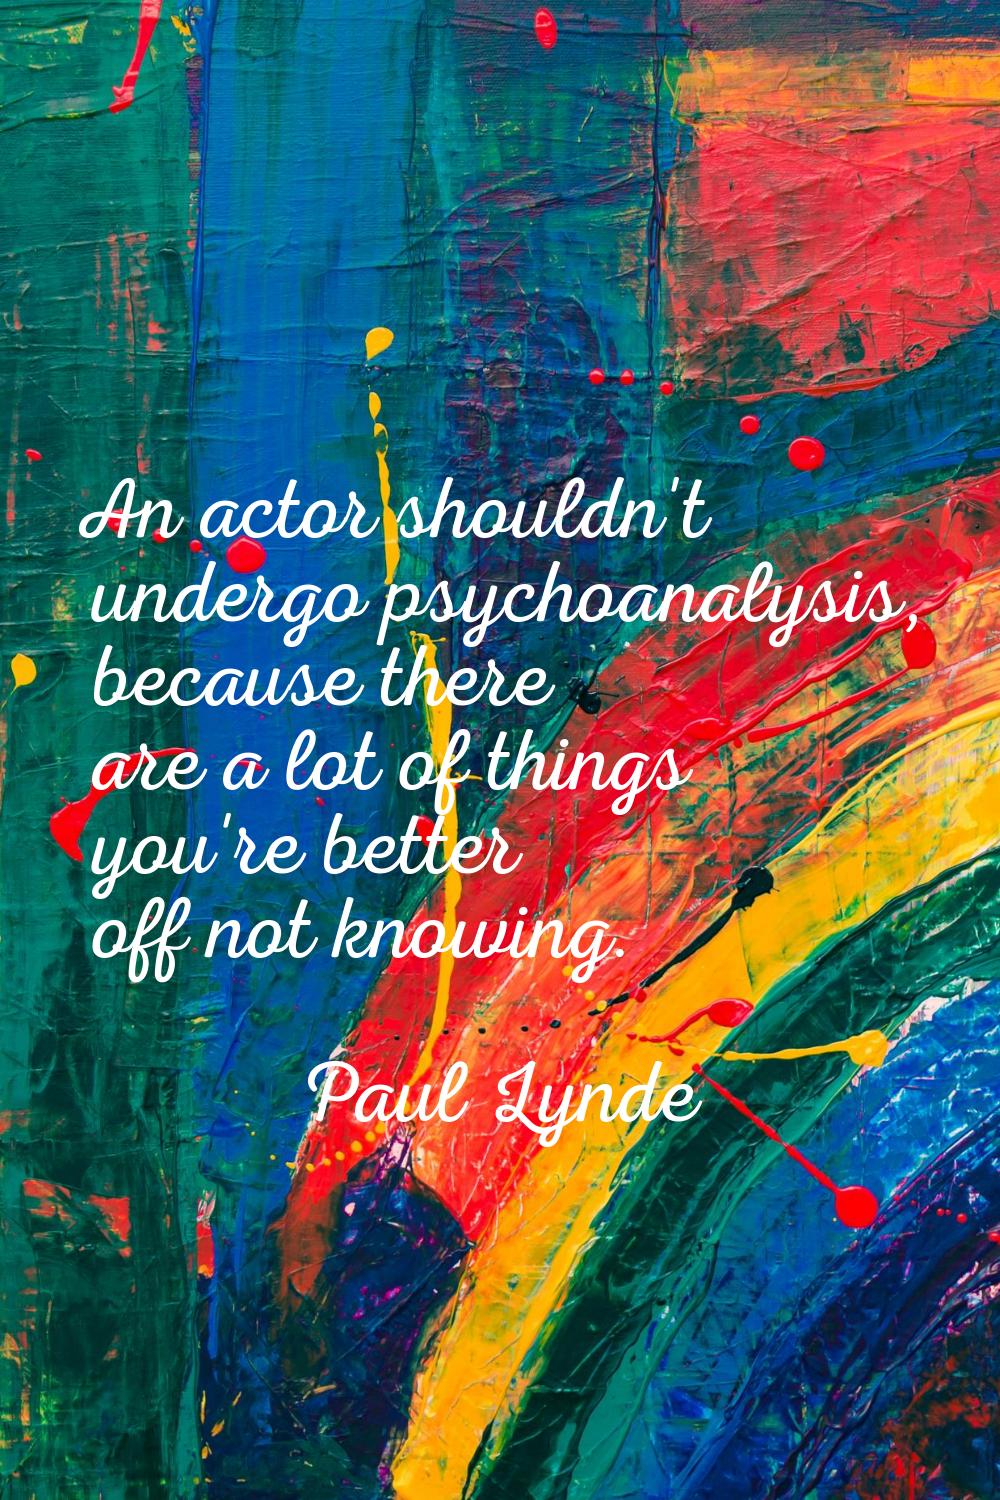 An actor shouldn't undergo psychoanalysis, because there are a lot of things you're better off not 